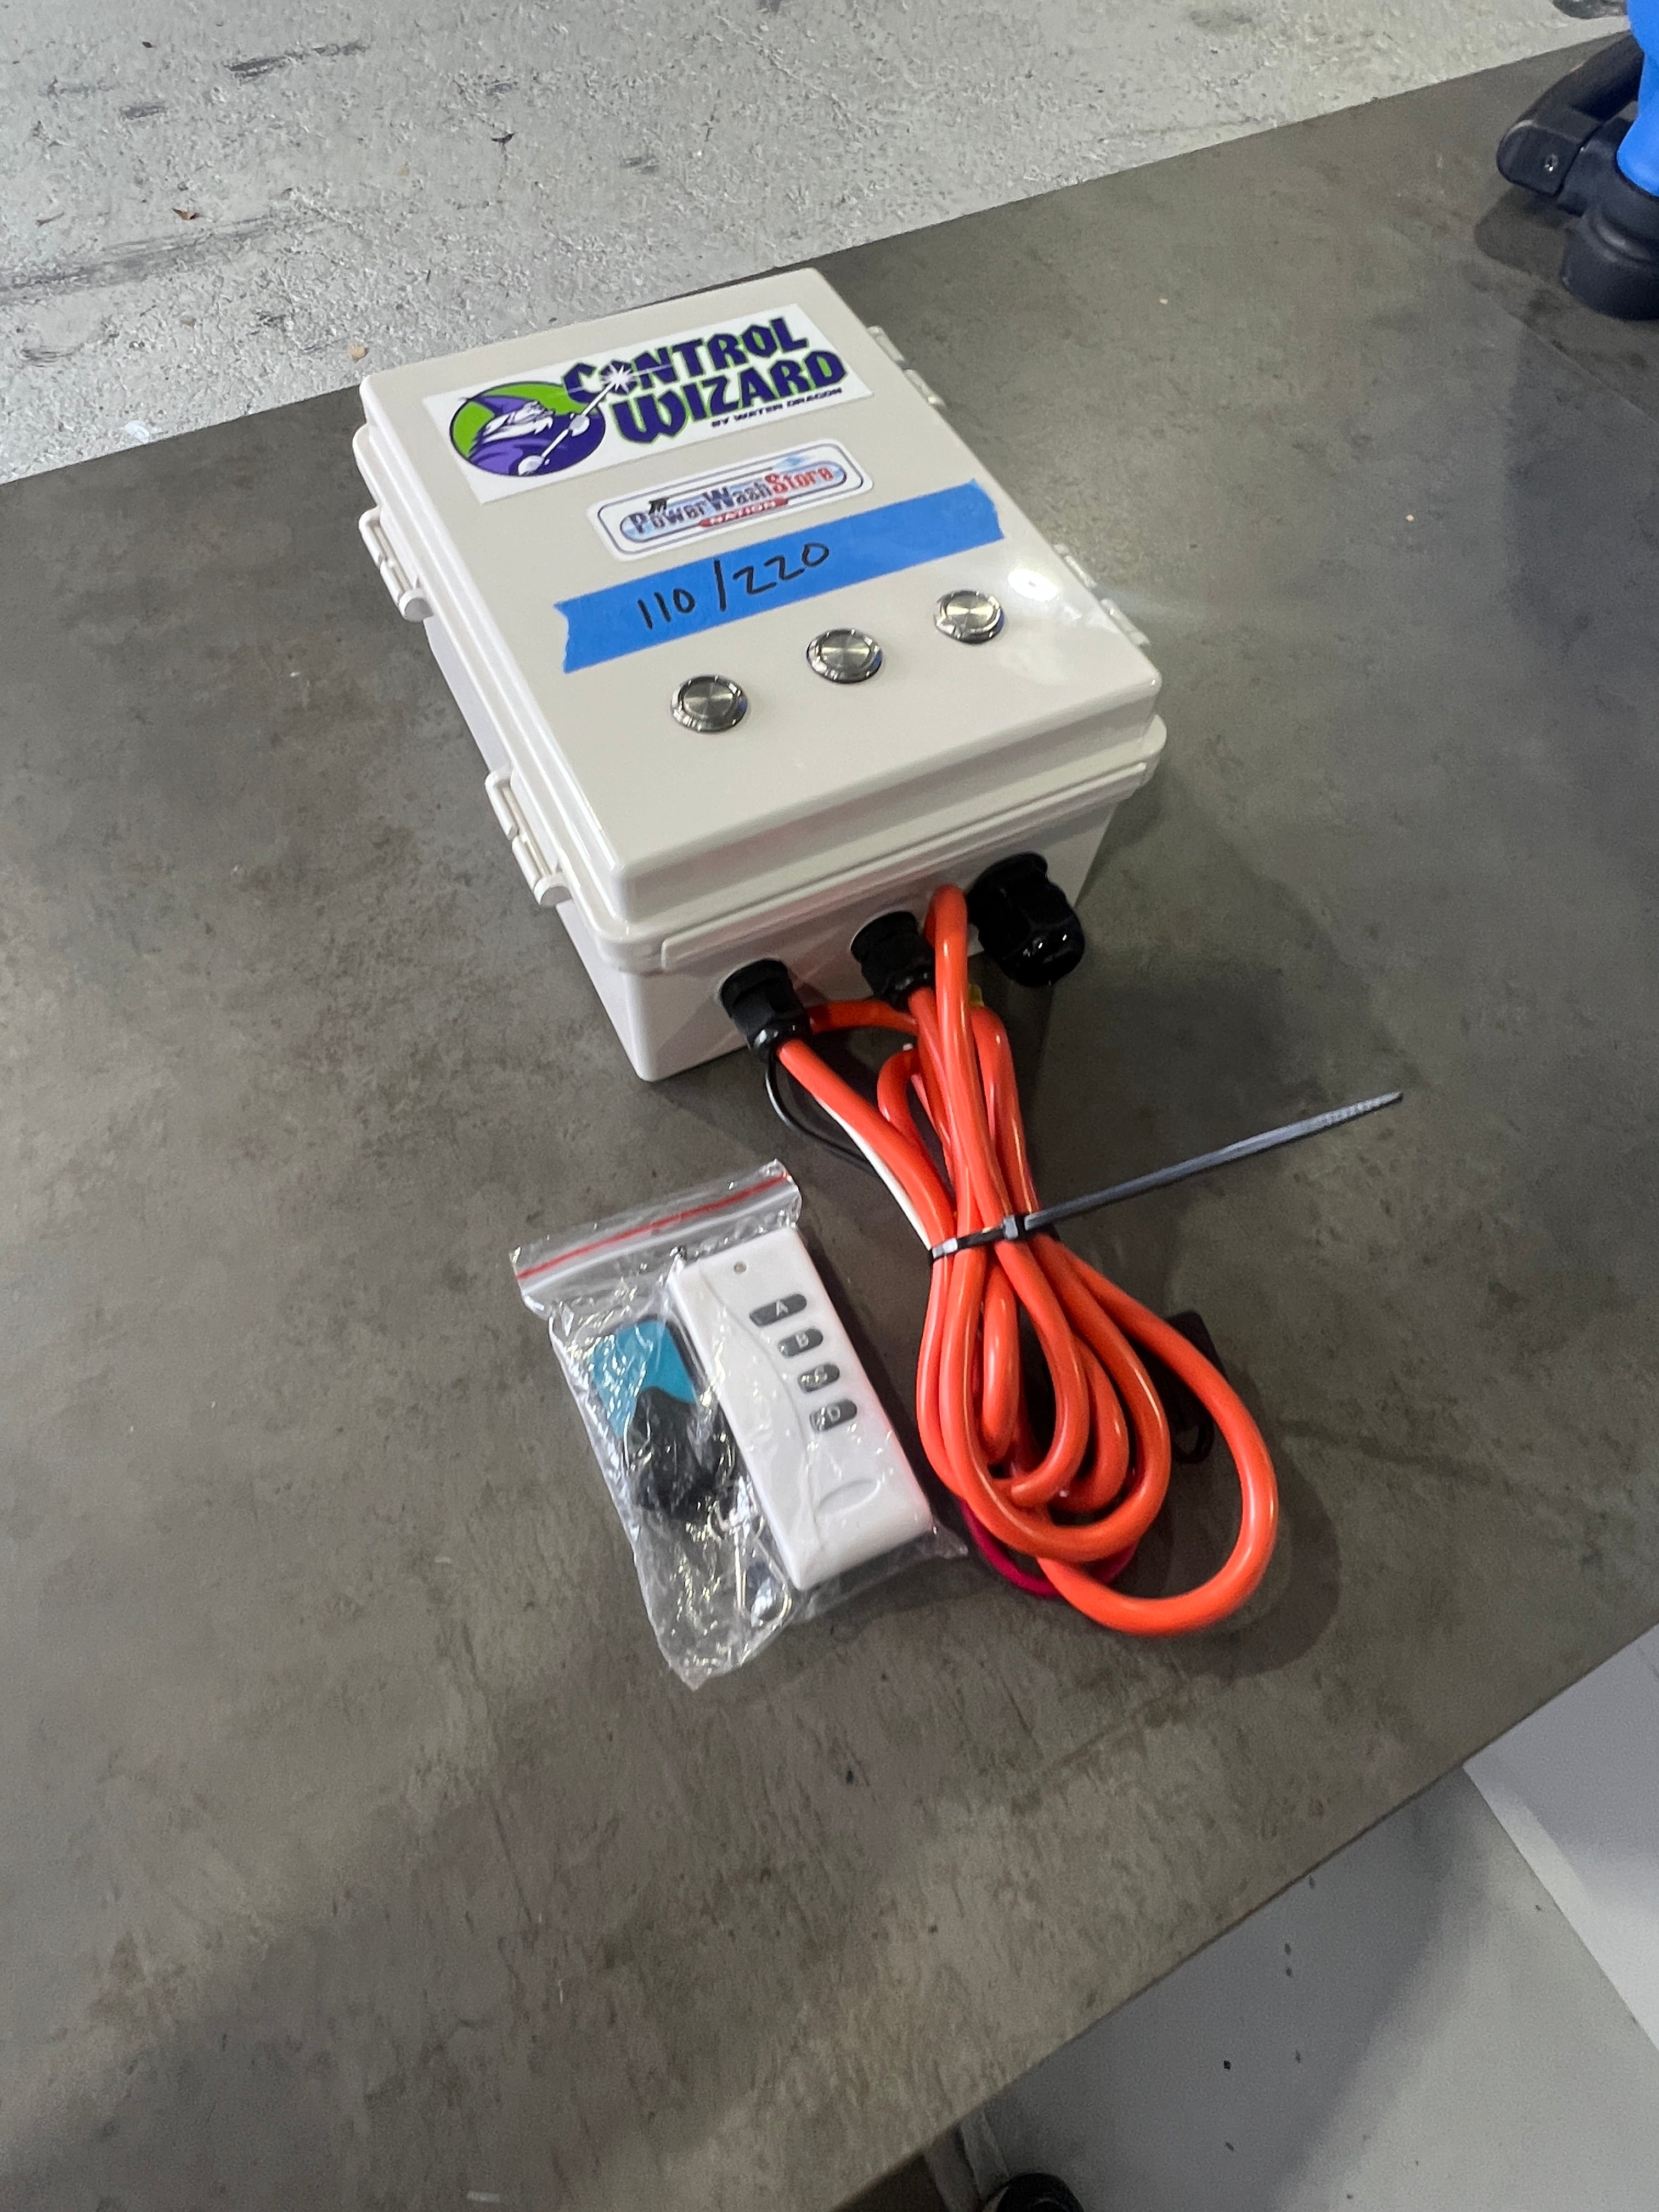 Control Wizard - 12 V Remote Control Unit Only